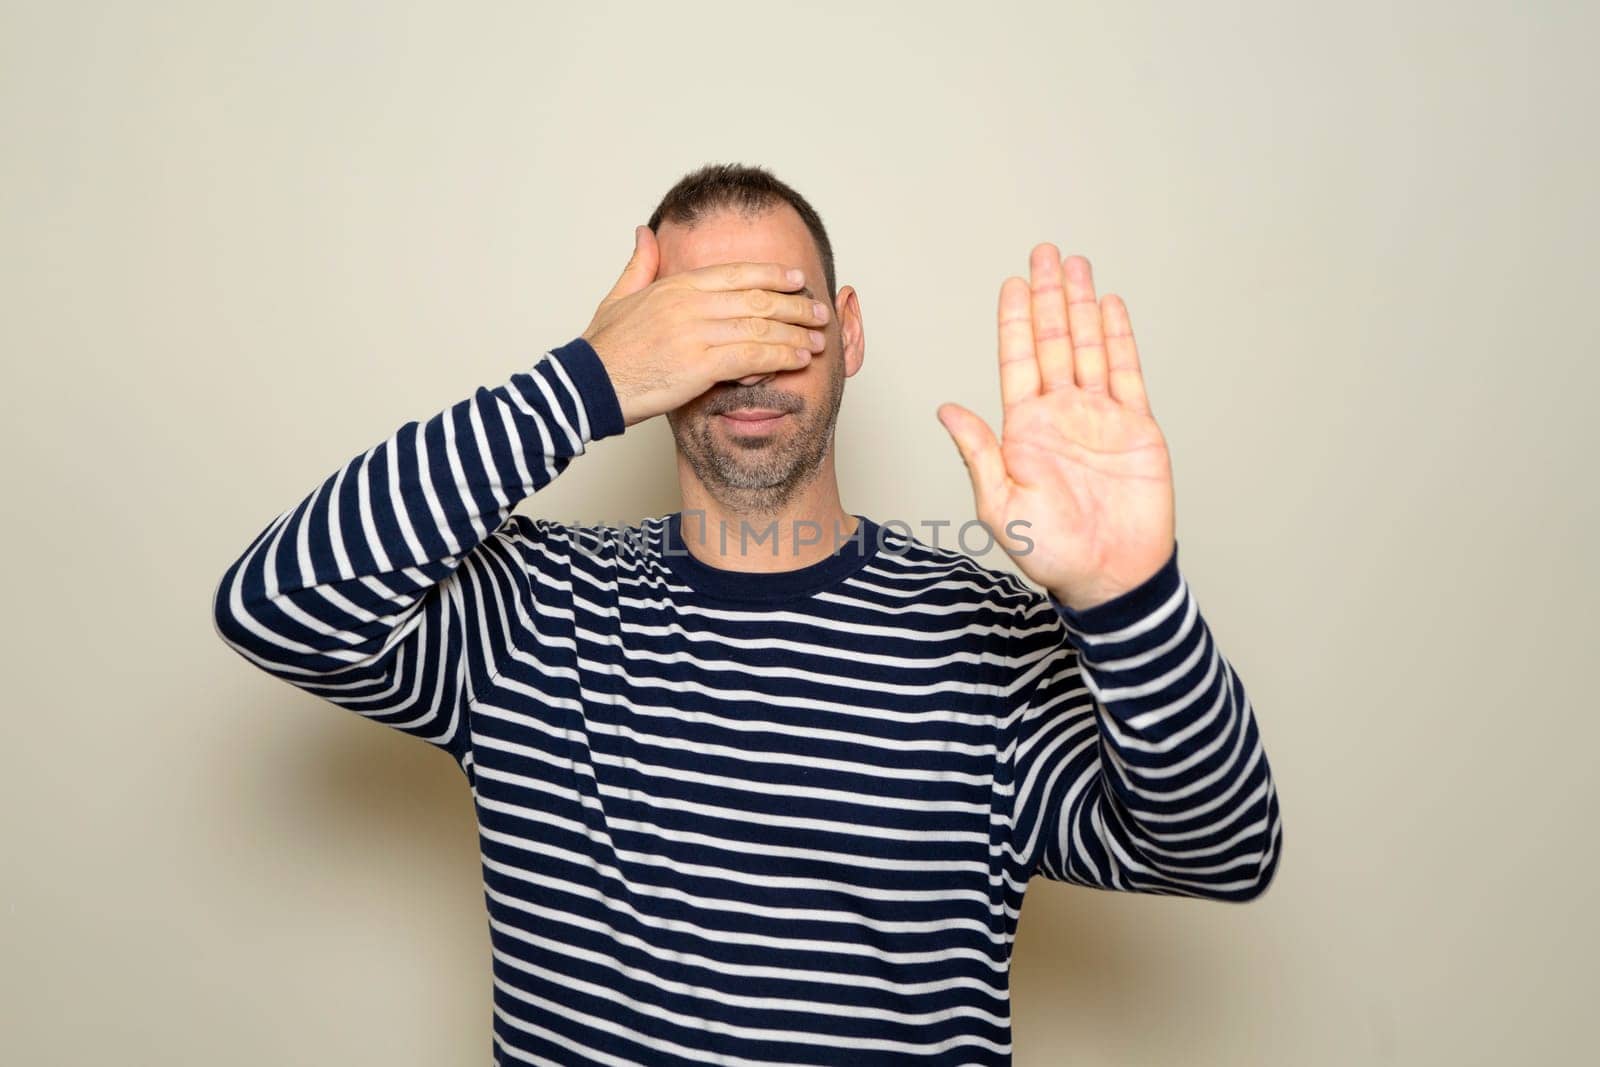 Hispanic man with beard in his 40s wearing a striped sweater covering his eyes with his hands and making stop gesture with a sad and afraid expression. Embarrassed and negative concept.